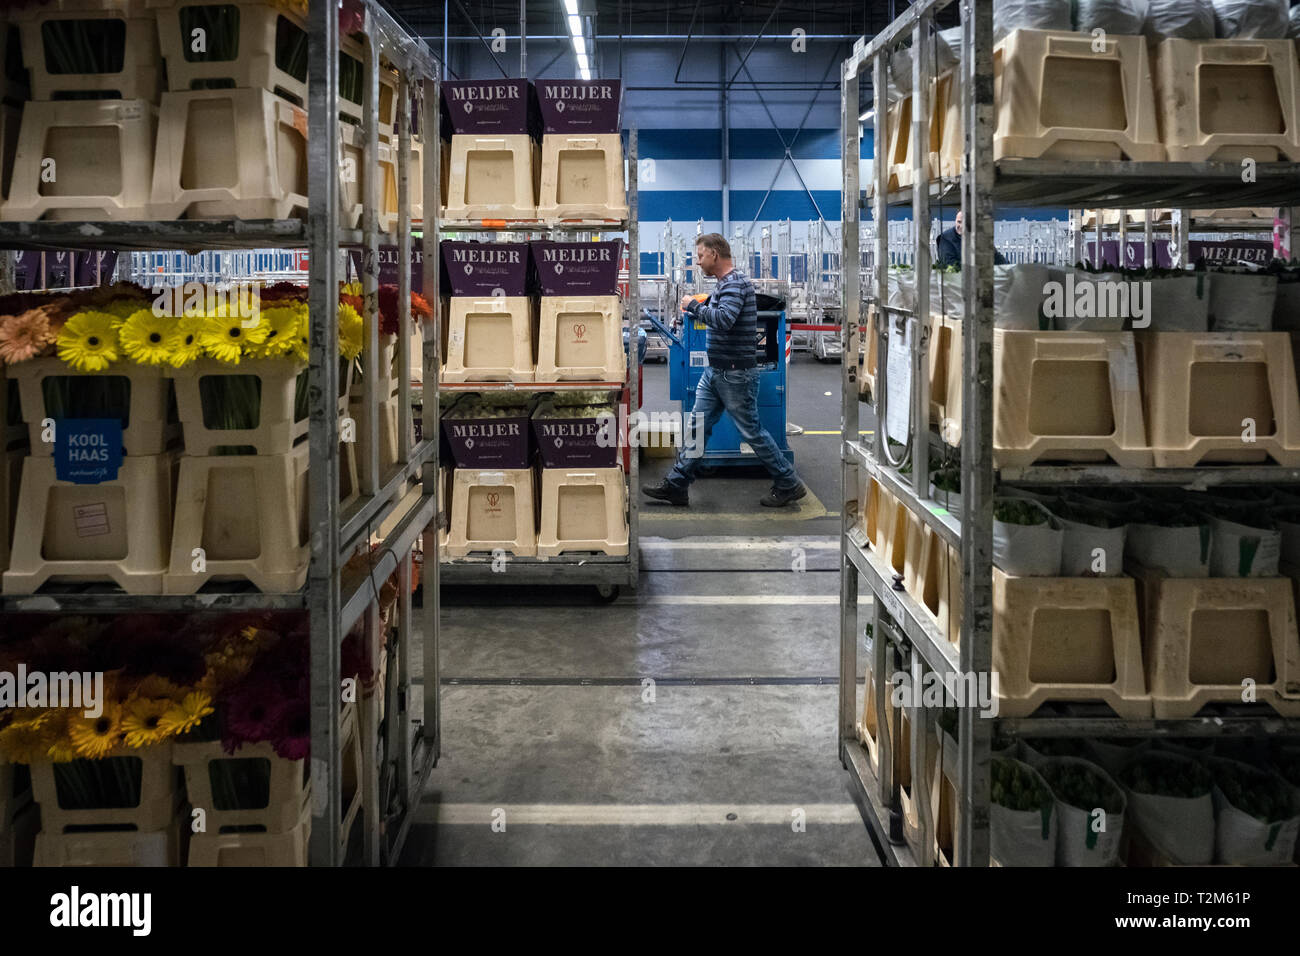 Workers of the company distribute the boxes of flowers to be sent to their buyers. This auction is one of the largest flower auctions in the world. Stock Photo